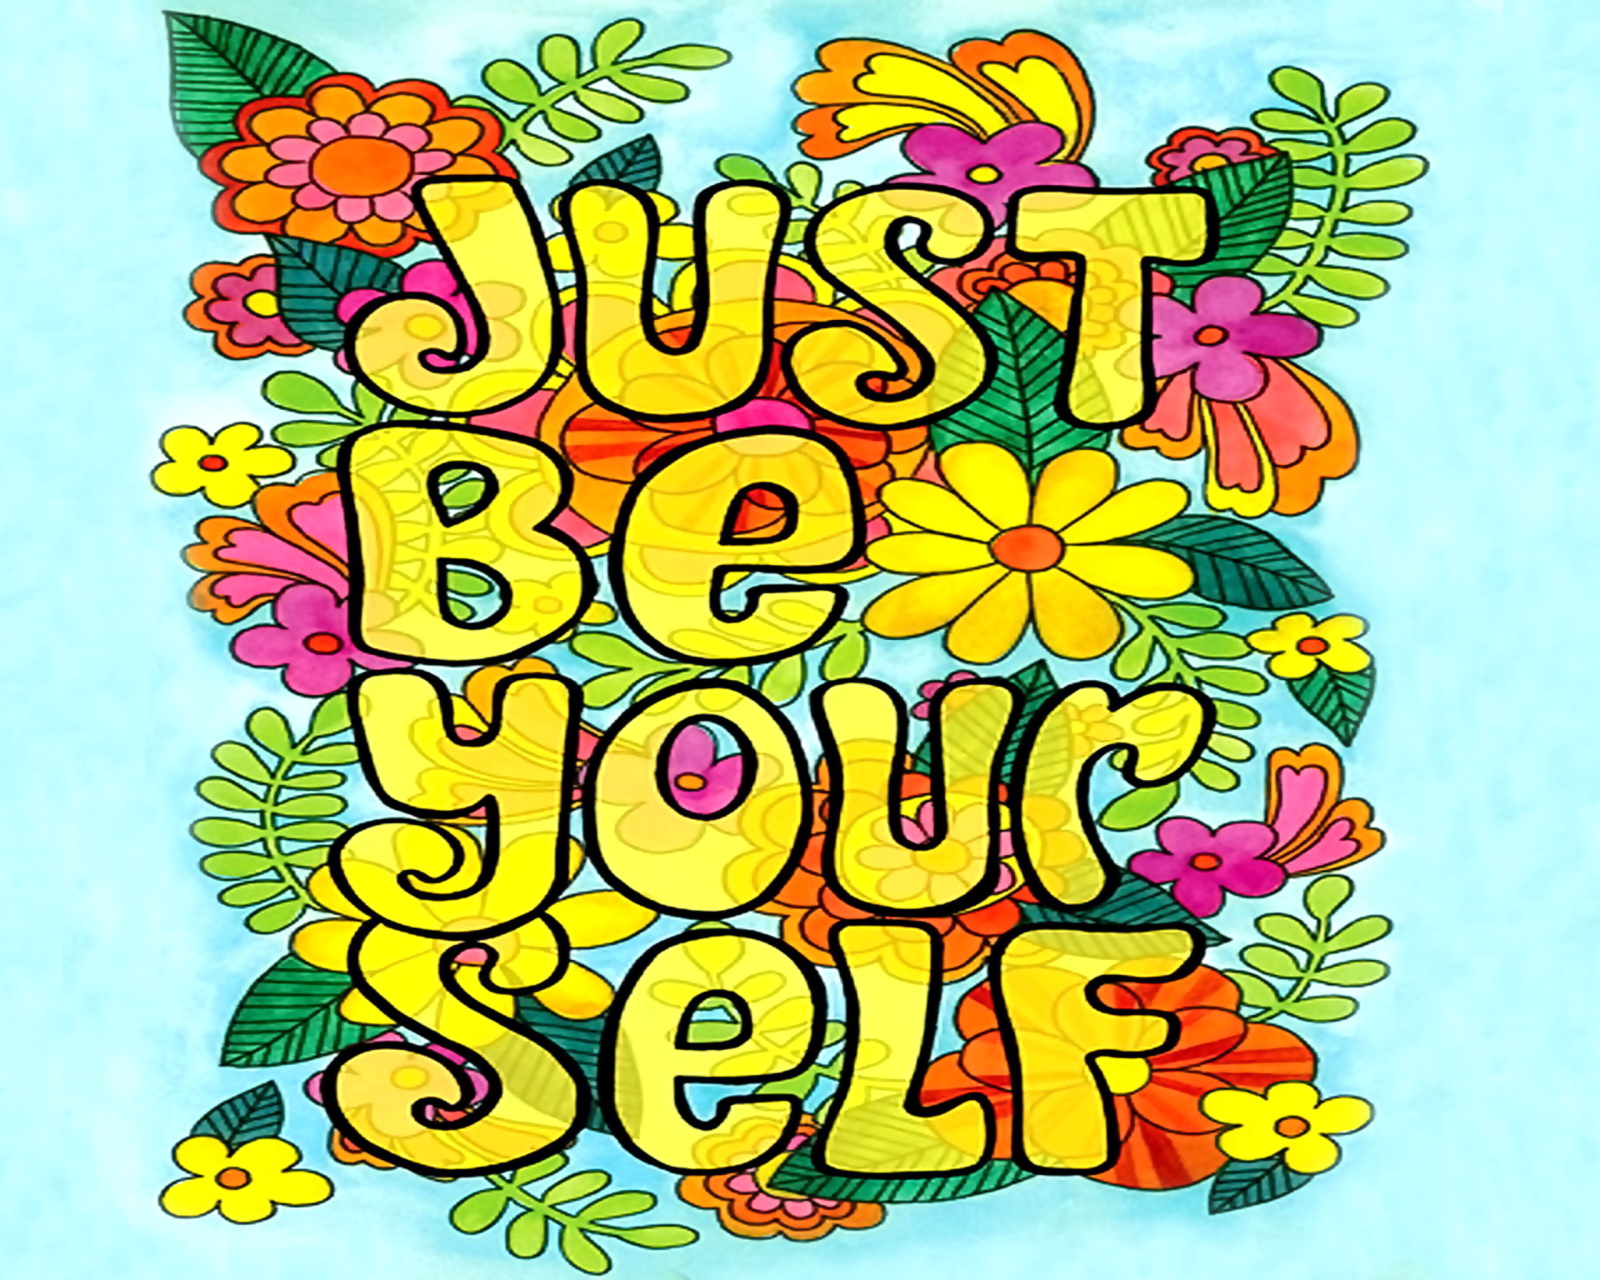 Just Be Yourself screenshot #1 1600x1280